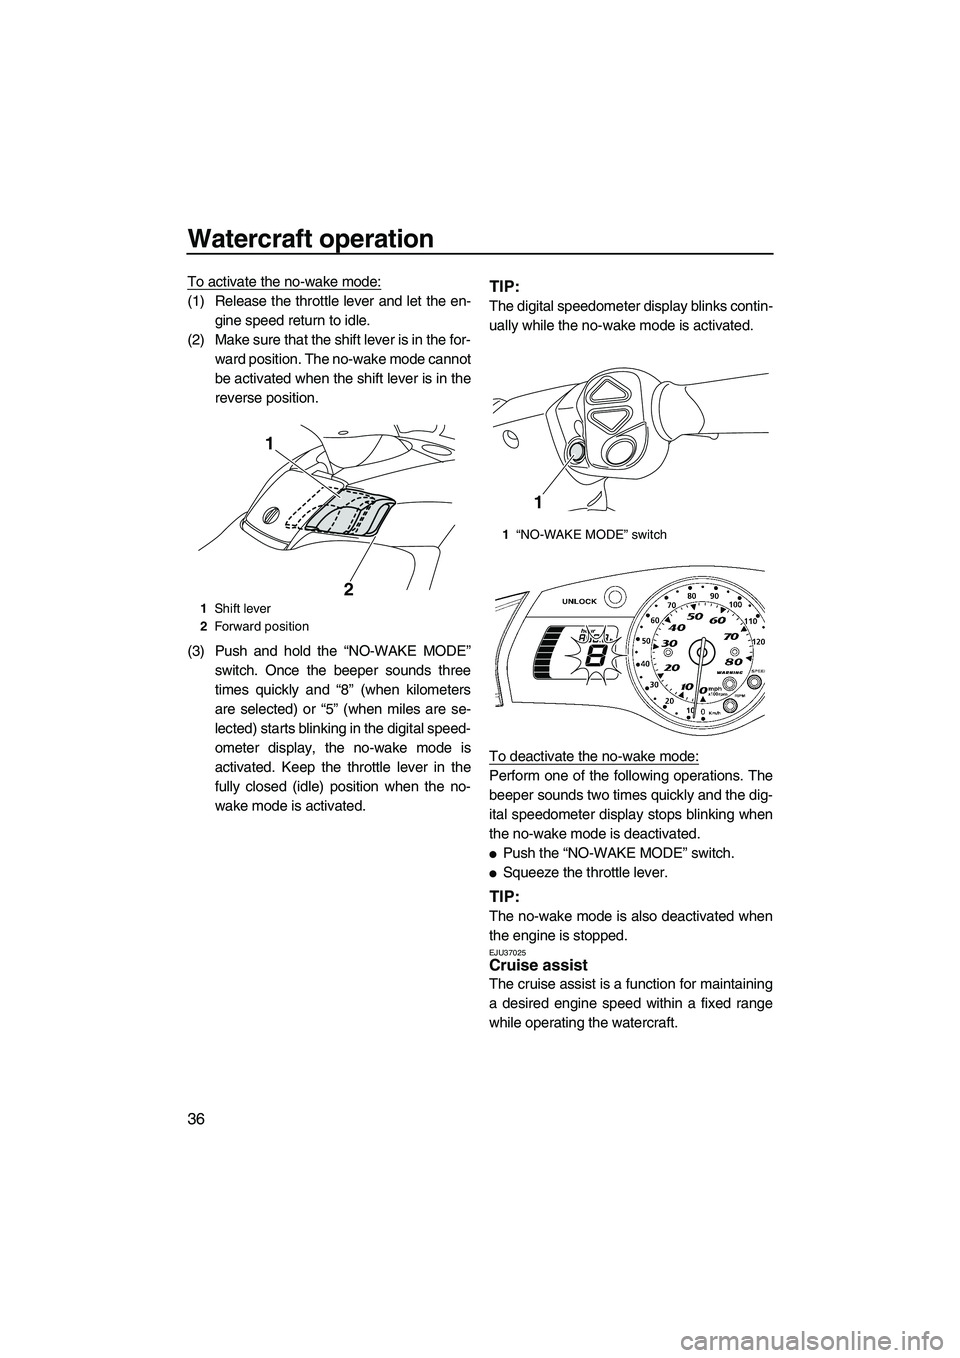 YAMAHA SVHO 2011 Service Manual Watercraft operation
36
To activate the no-wake mode:
(1) Release the throttle lever and let the en-
gine speed return to idle.
(2) Make sure that the shift lever is in the for-
ward position. The no-